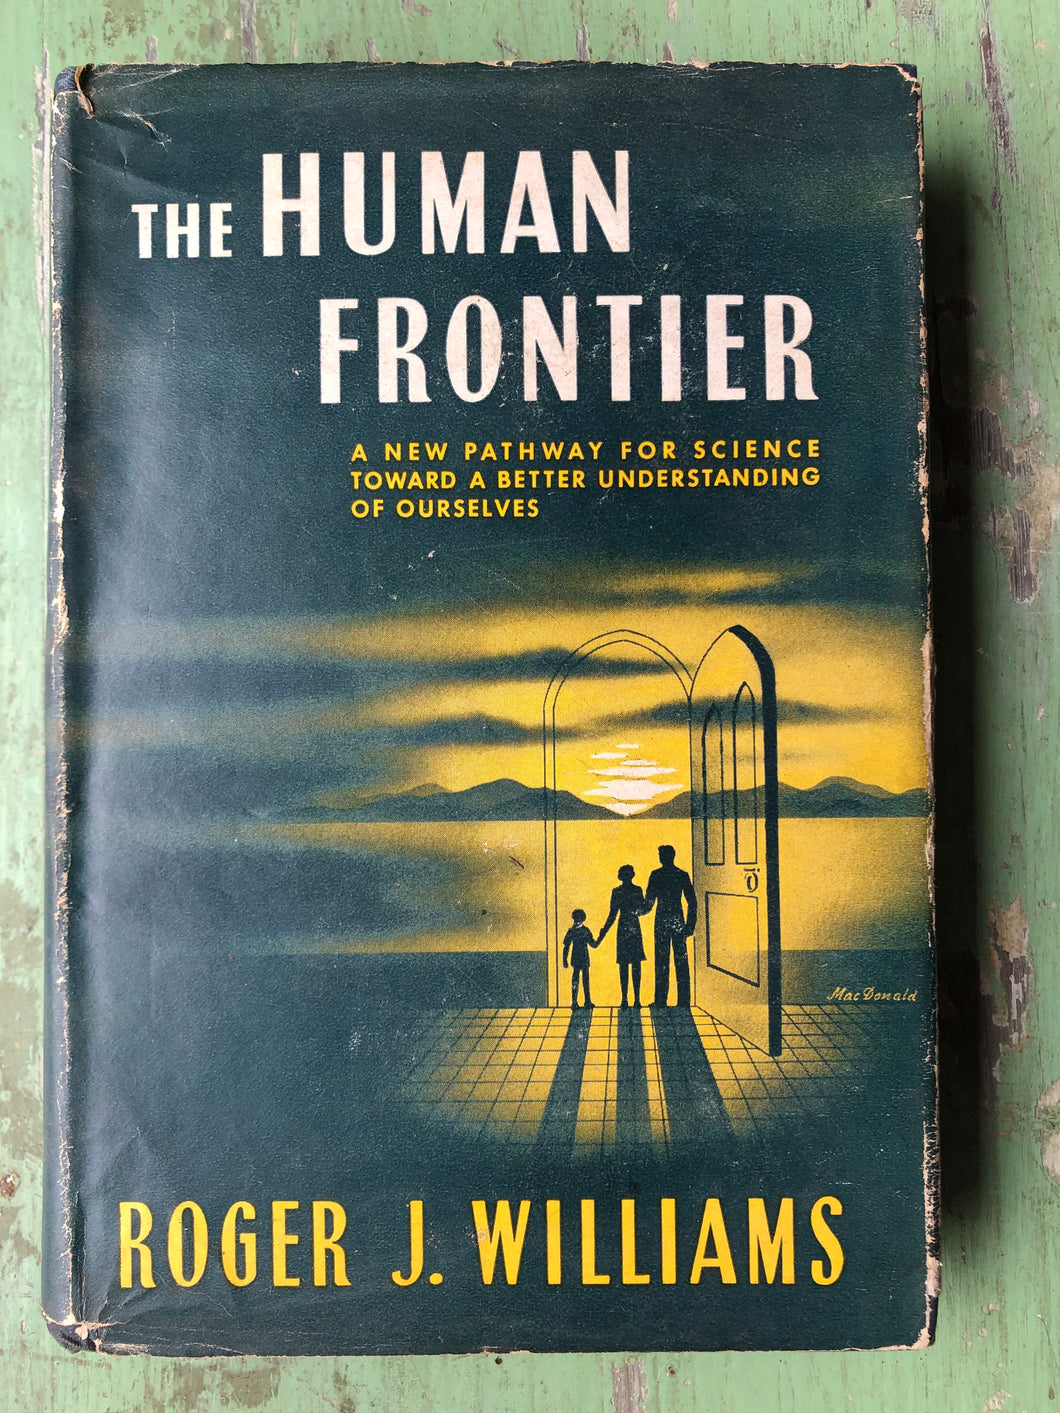 The Human Frontier: A new pathway for Science toward a Better Understanding of Ourselves. by Roger J. Williams